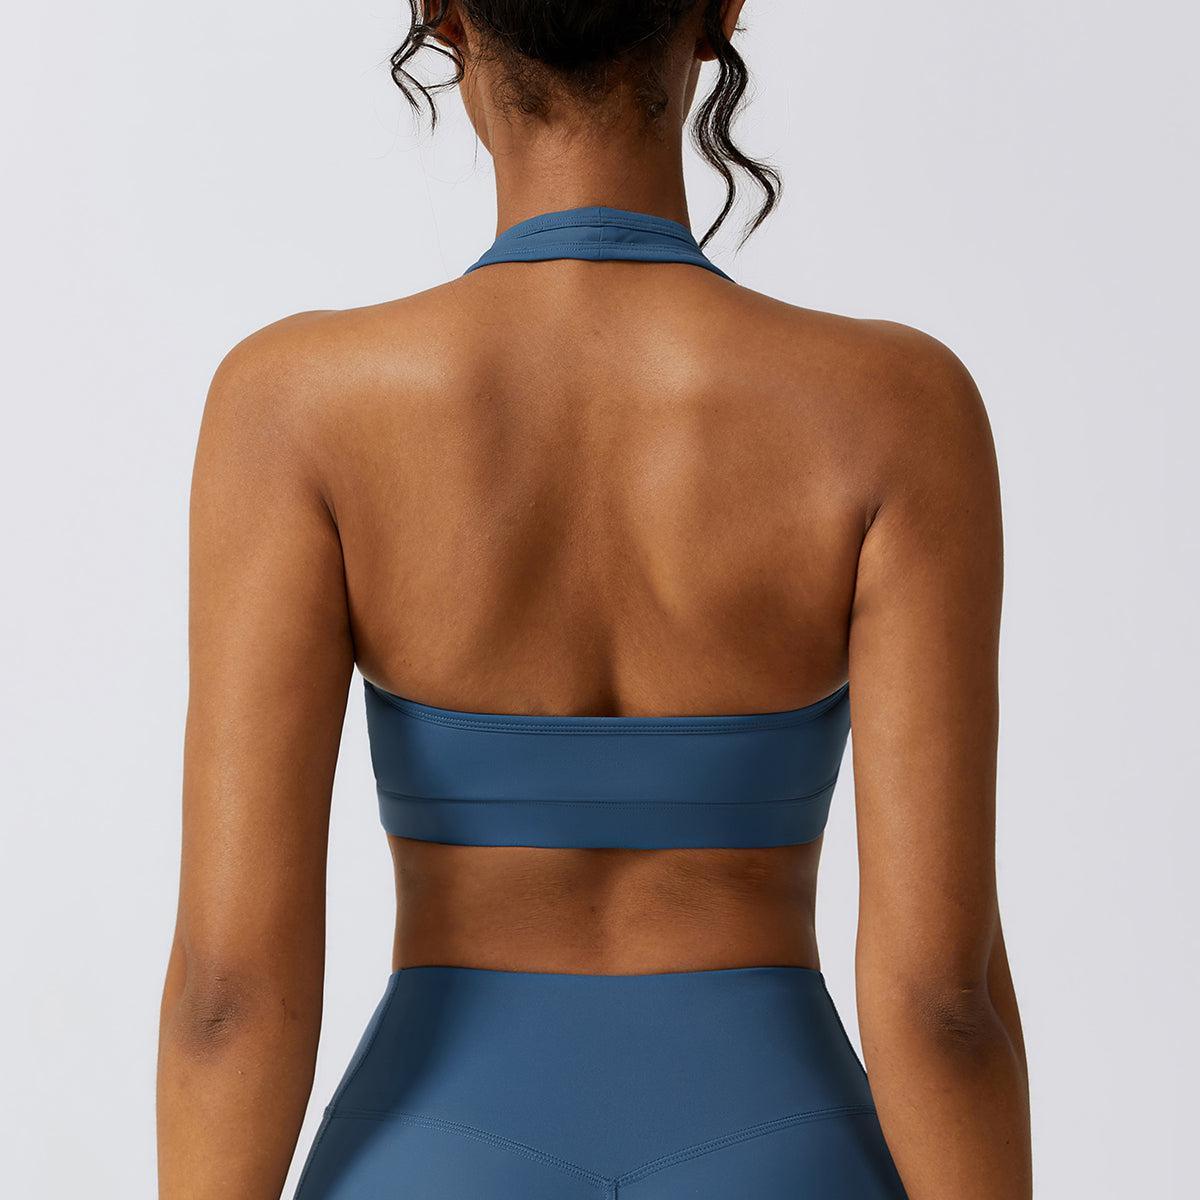 the back of a woman wearing a blue sports bra